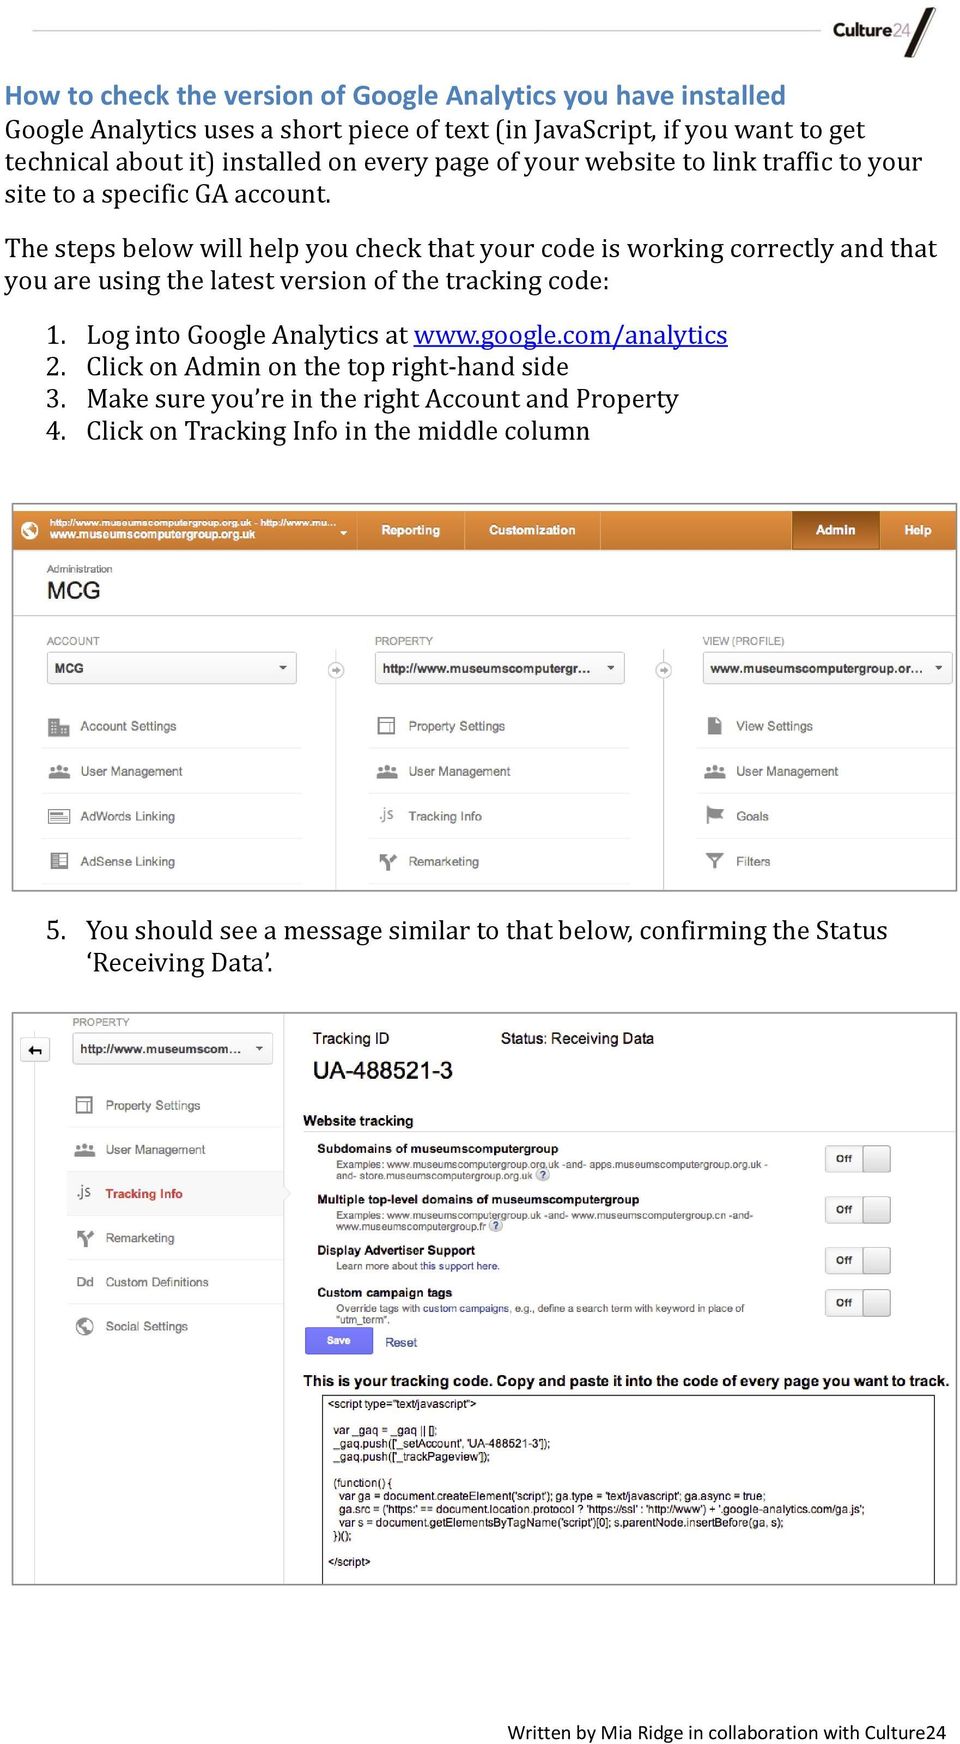 The steps below will help you check that your code is working correctly and that you are using the latest version of the tracking code: 1. Log into Google Analytics at www.